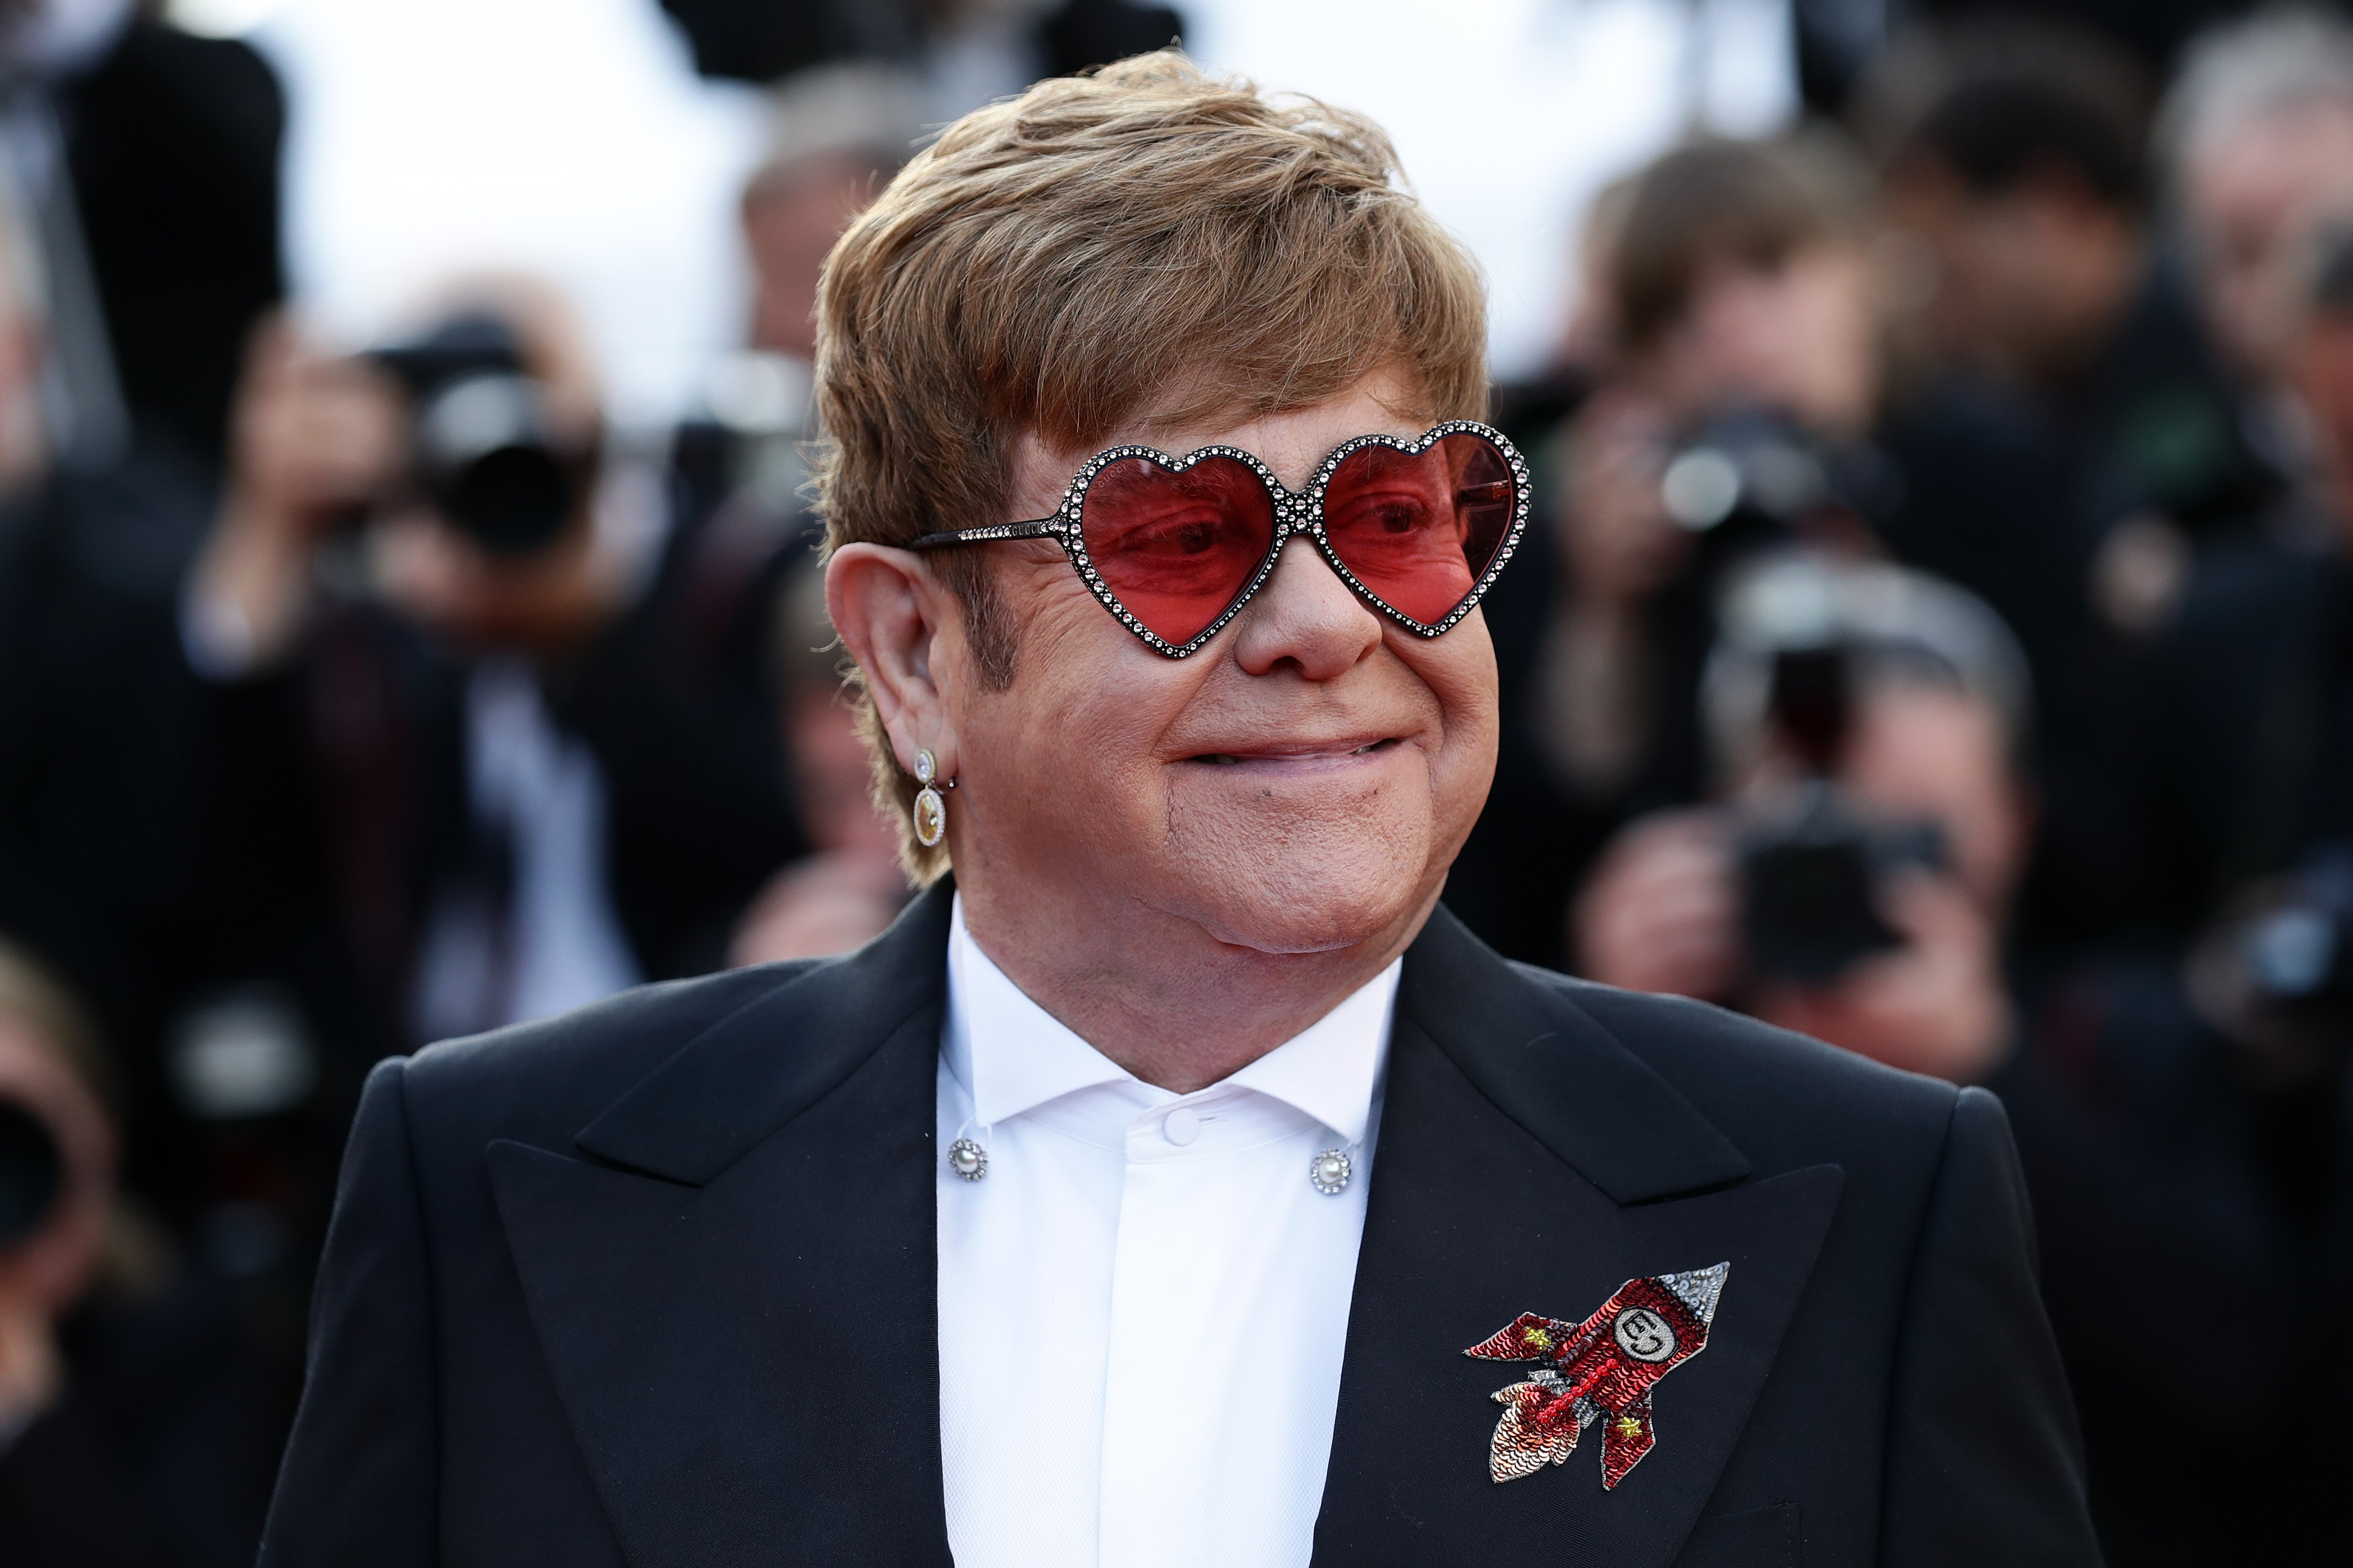 Sir Elton John attends the screening of "Rocketman" during the 72nd annual Cannes Film Festival on May 16, 2019, in Cannes, France. | Source: Getty Images.